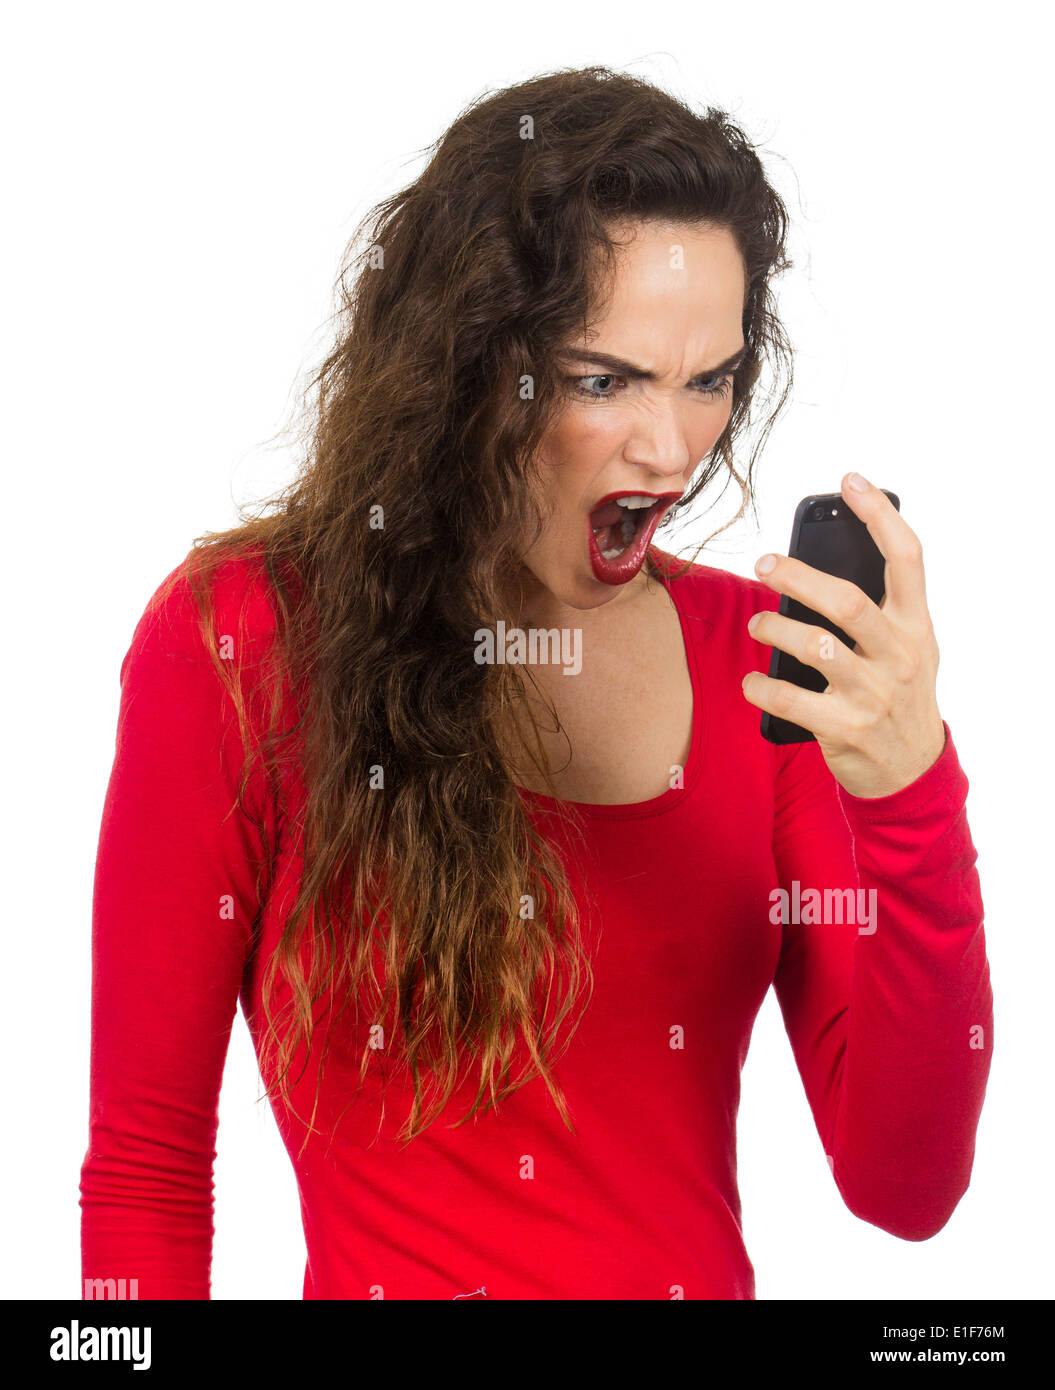 A very angry, annoyed and frustrated woman screaming at her phone in rage. Isolated on white. Stock Photo